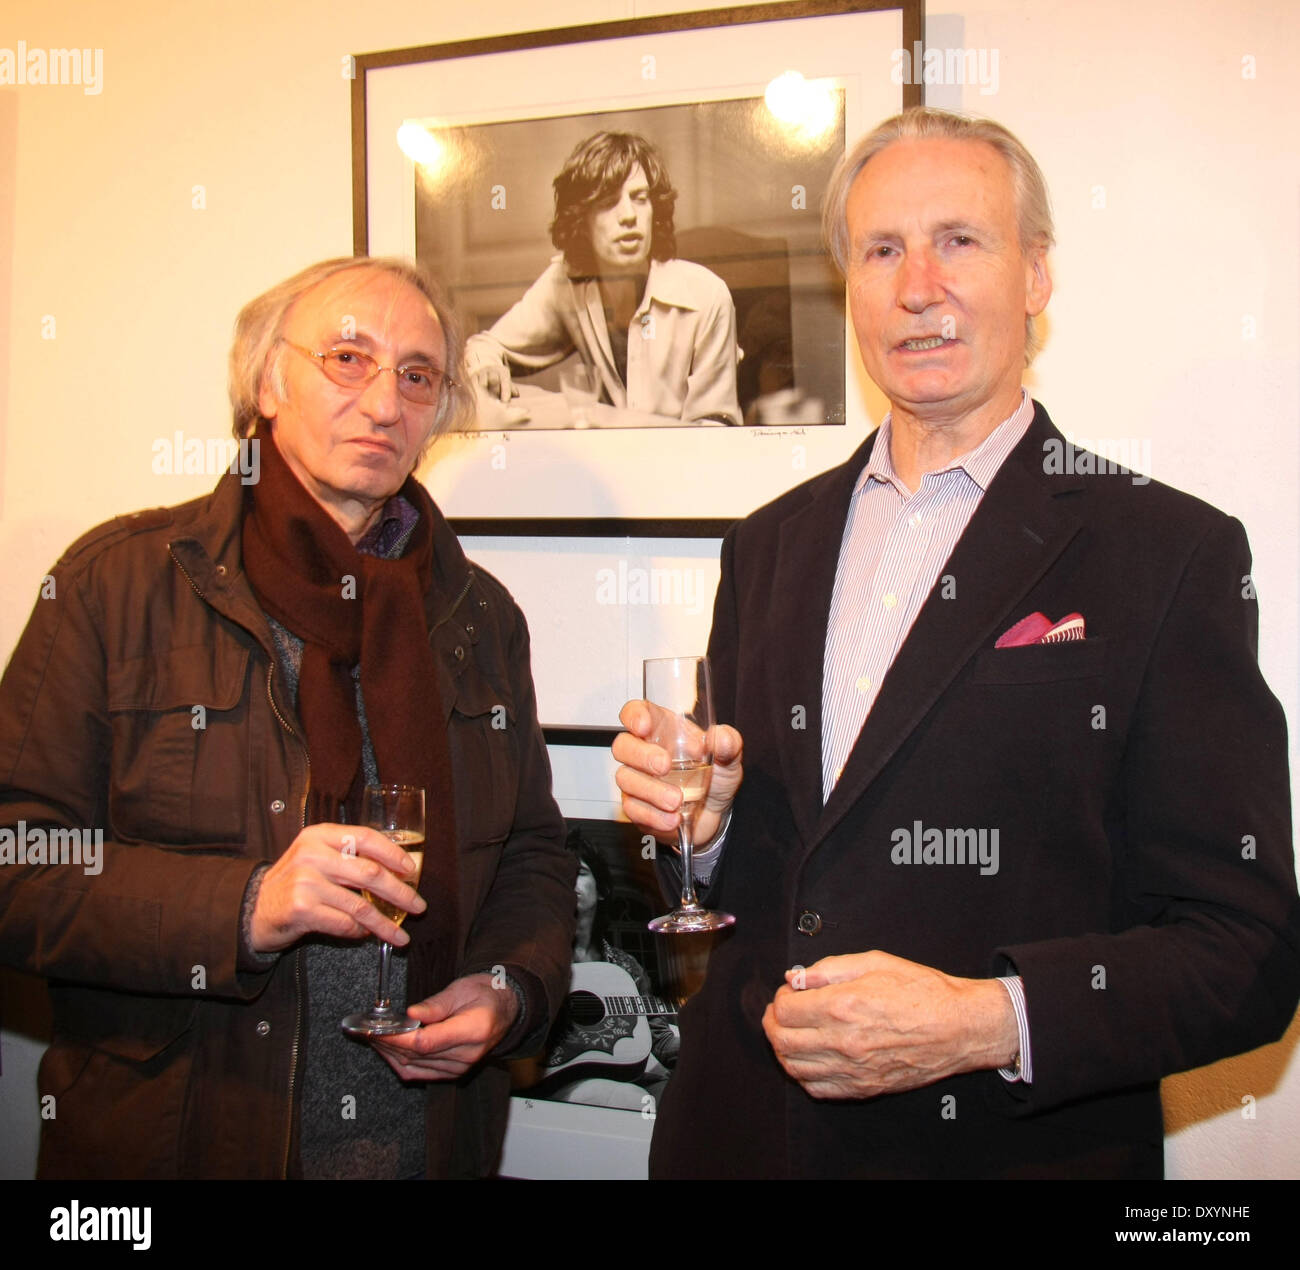 Brown Sugar on Main Street: Unseen Images of The Rolling Stones private viewing session at the Zebra Gallery Featuring: Dominique Tarle,Peter Webb Where: London United Kingdom When: 22 Nov 2012 Stock Photo